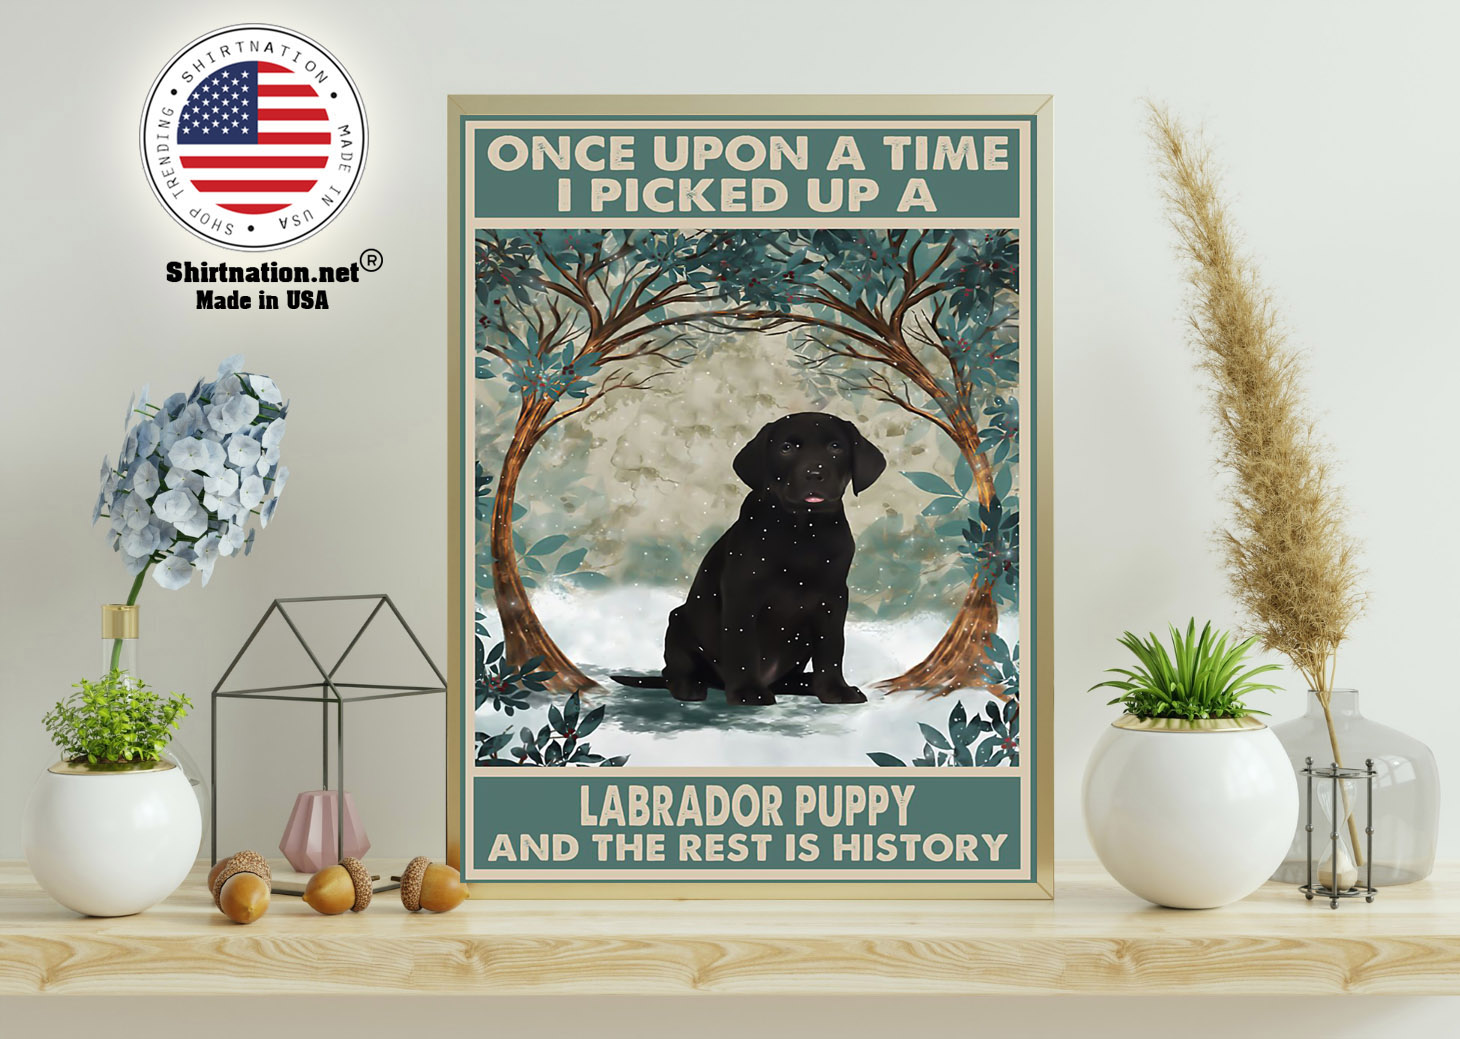 Once upon a time I picked up a labrador puppy and the rest is history poster 15